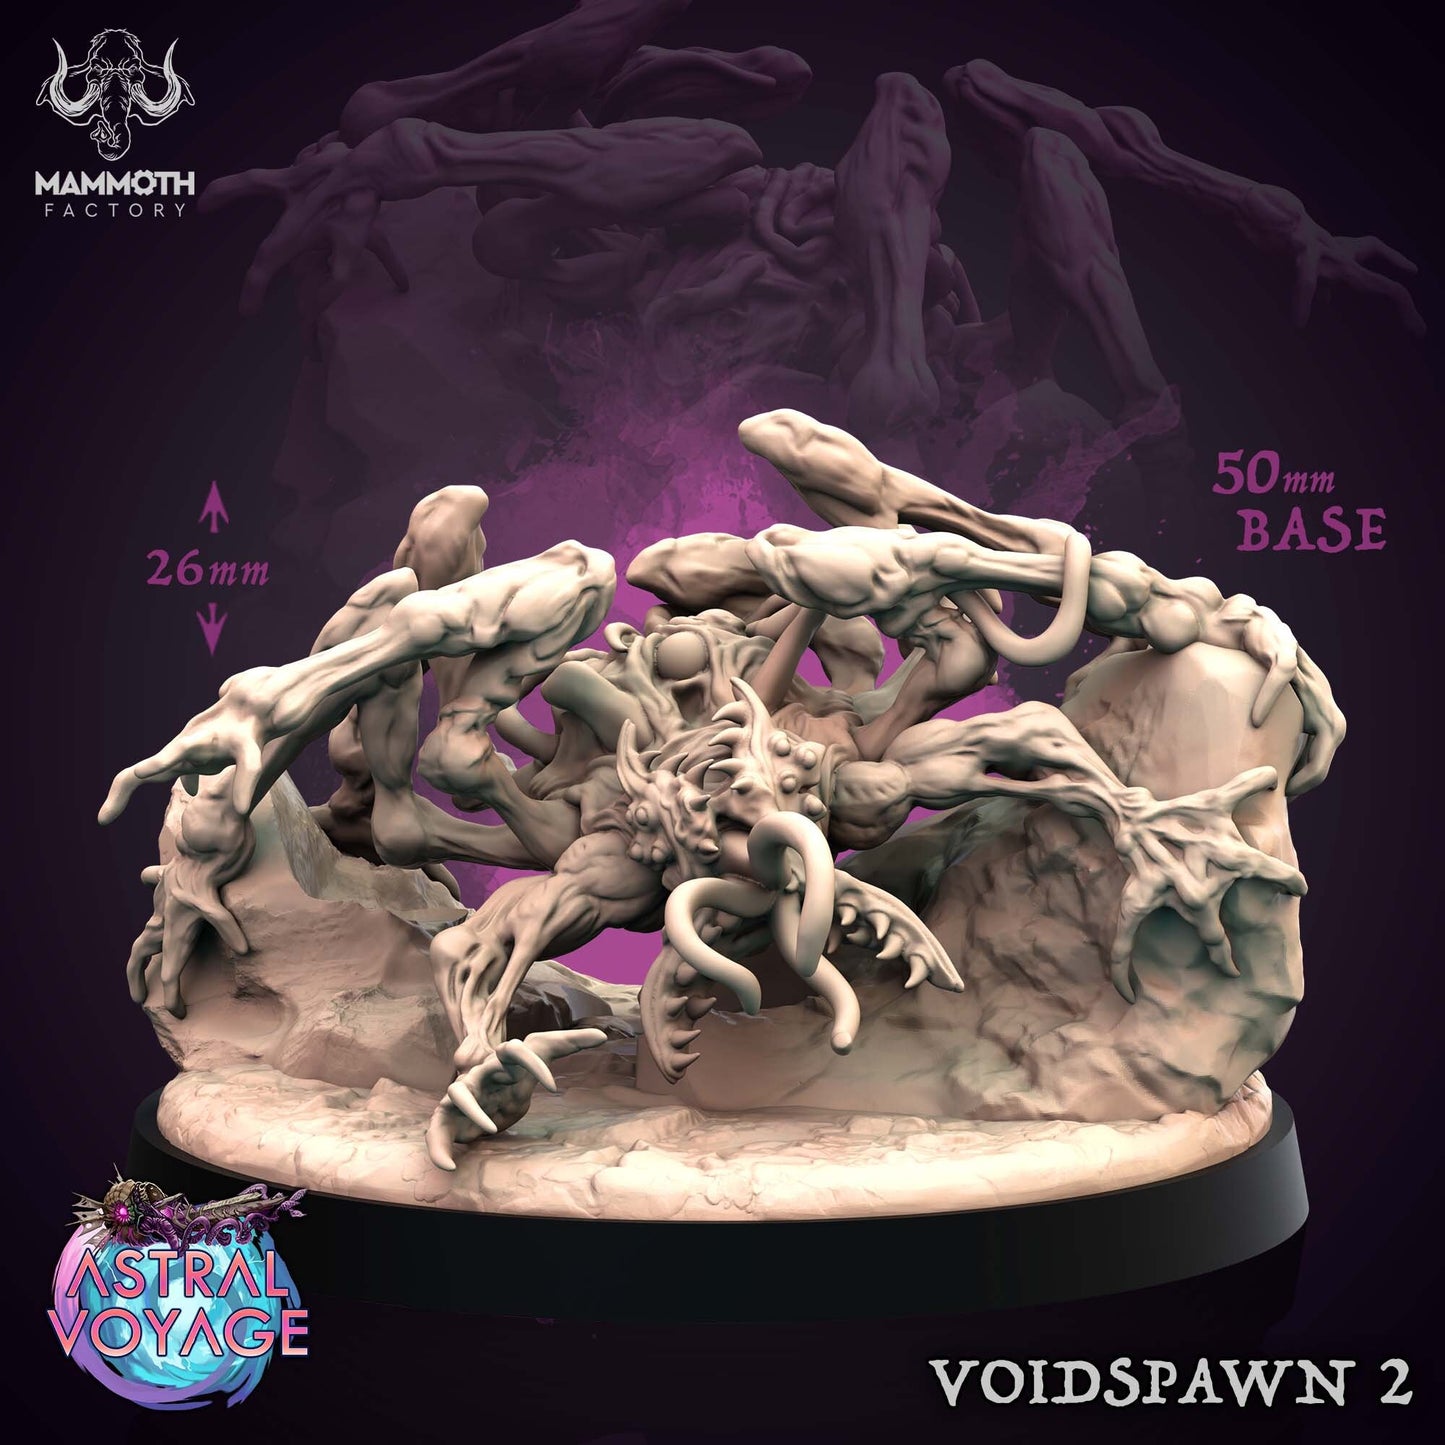 Void Spawns | Mammoth Factory | 3D Printed Resin Miniature | Dungeons and Dragons | Pathfinder | Tabletop Role Playing | D&D